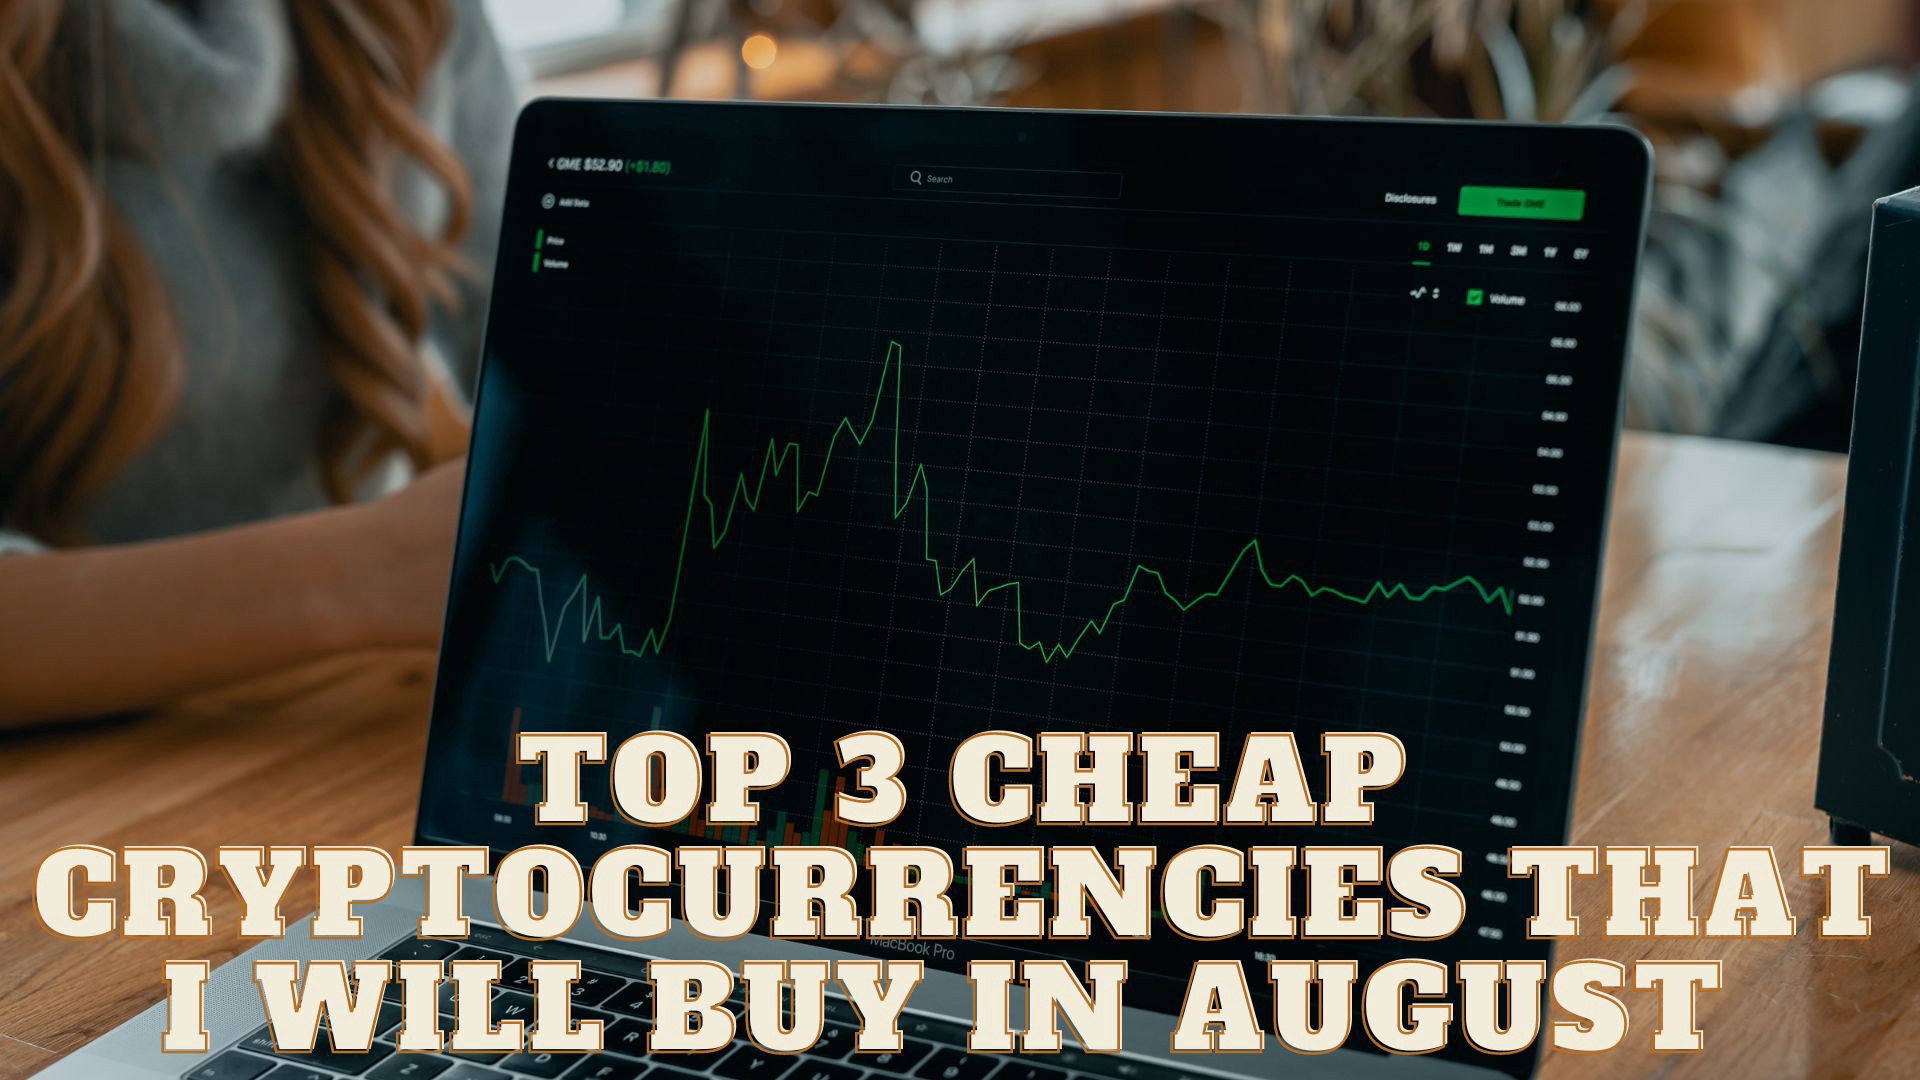 Top 3 Cheap Cryptocurrencies that I will Buy in August